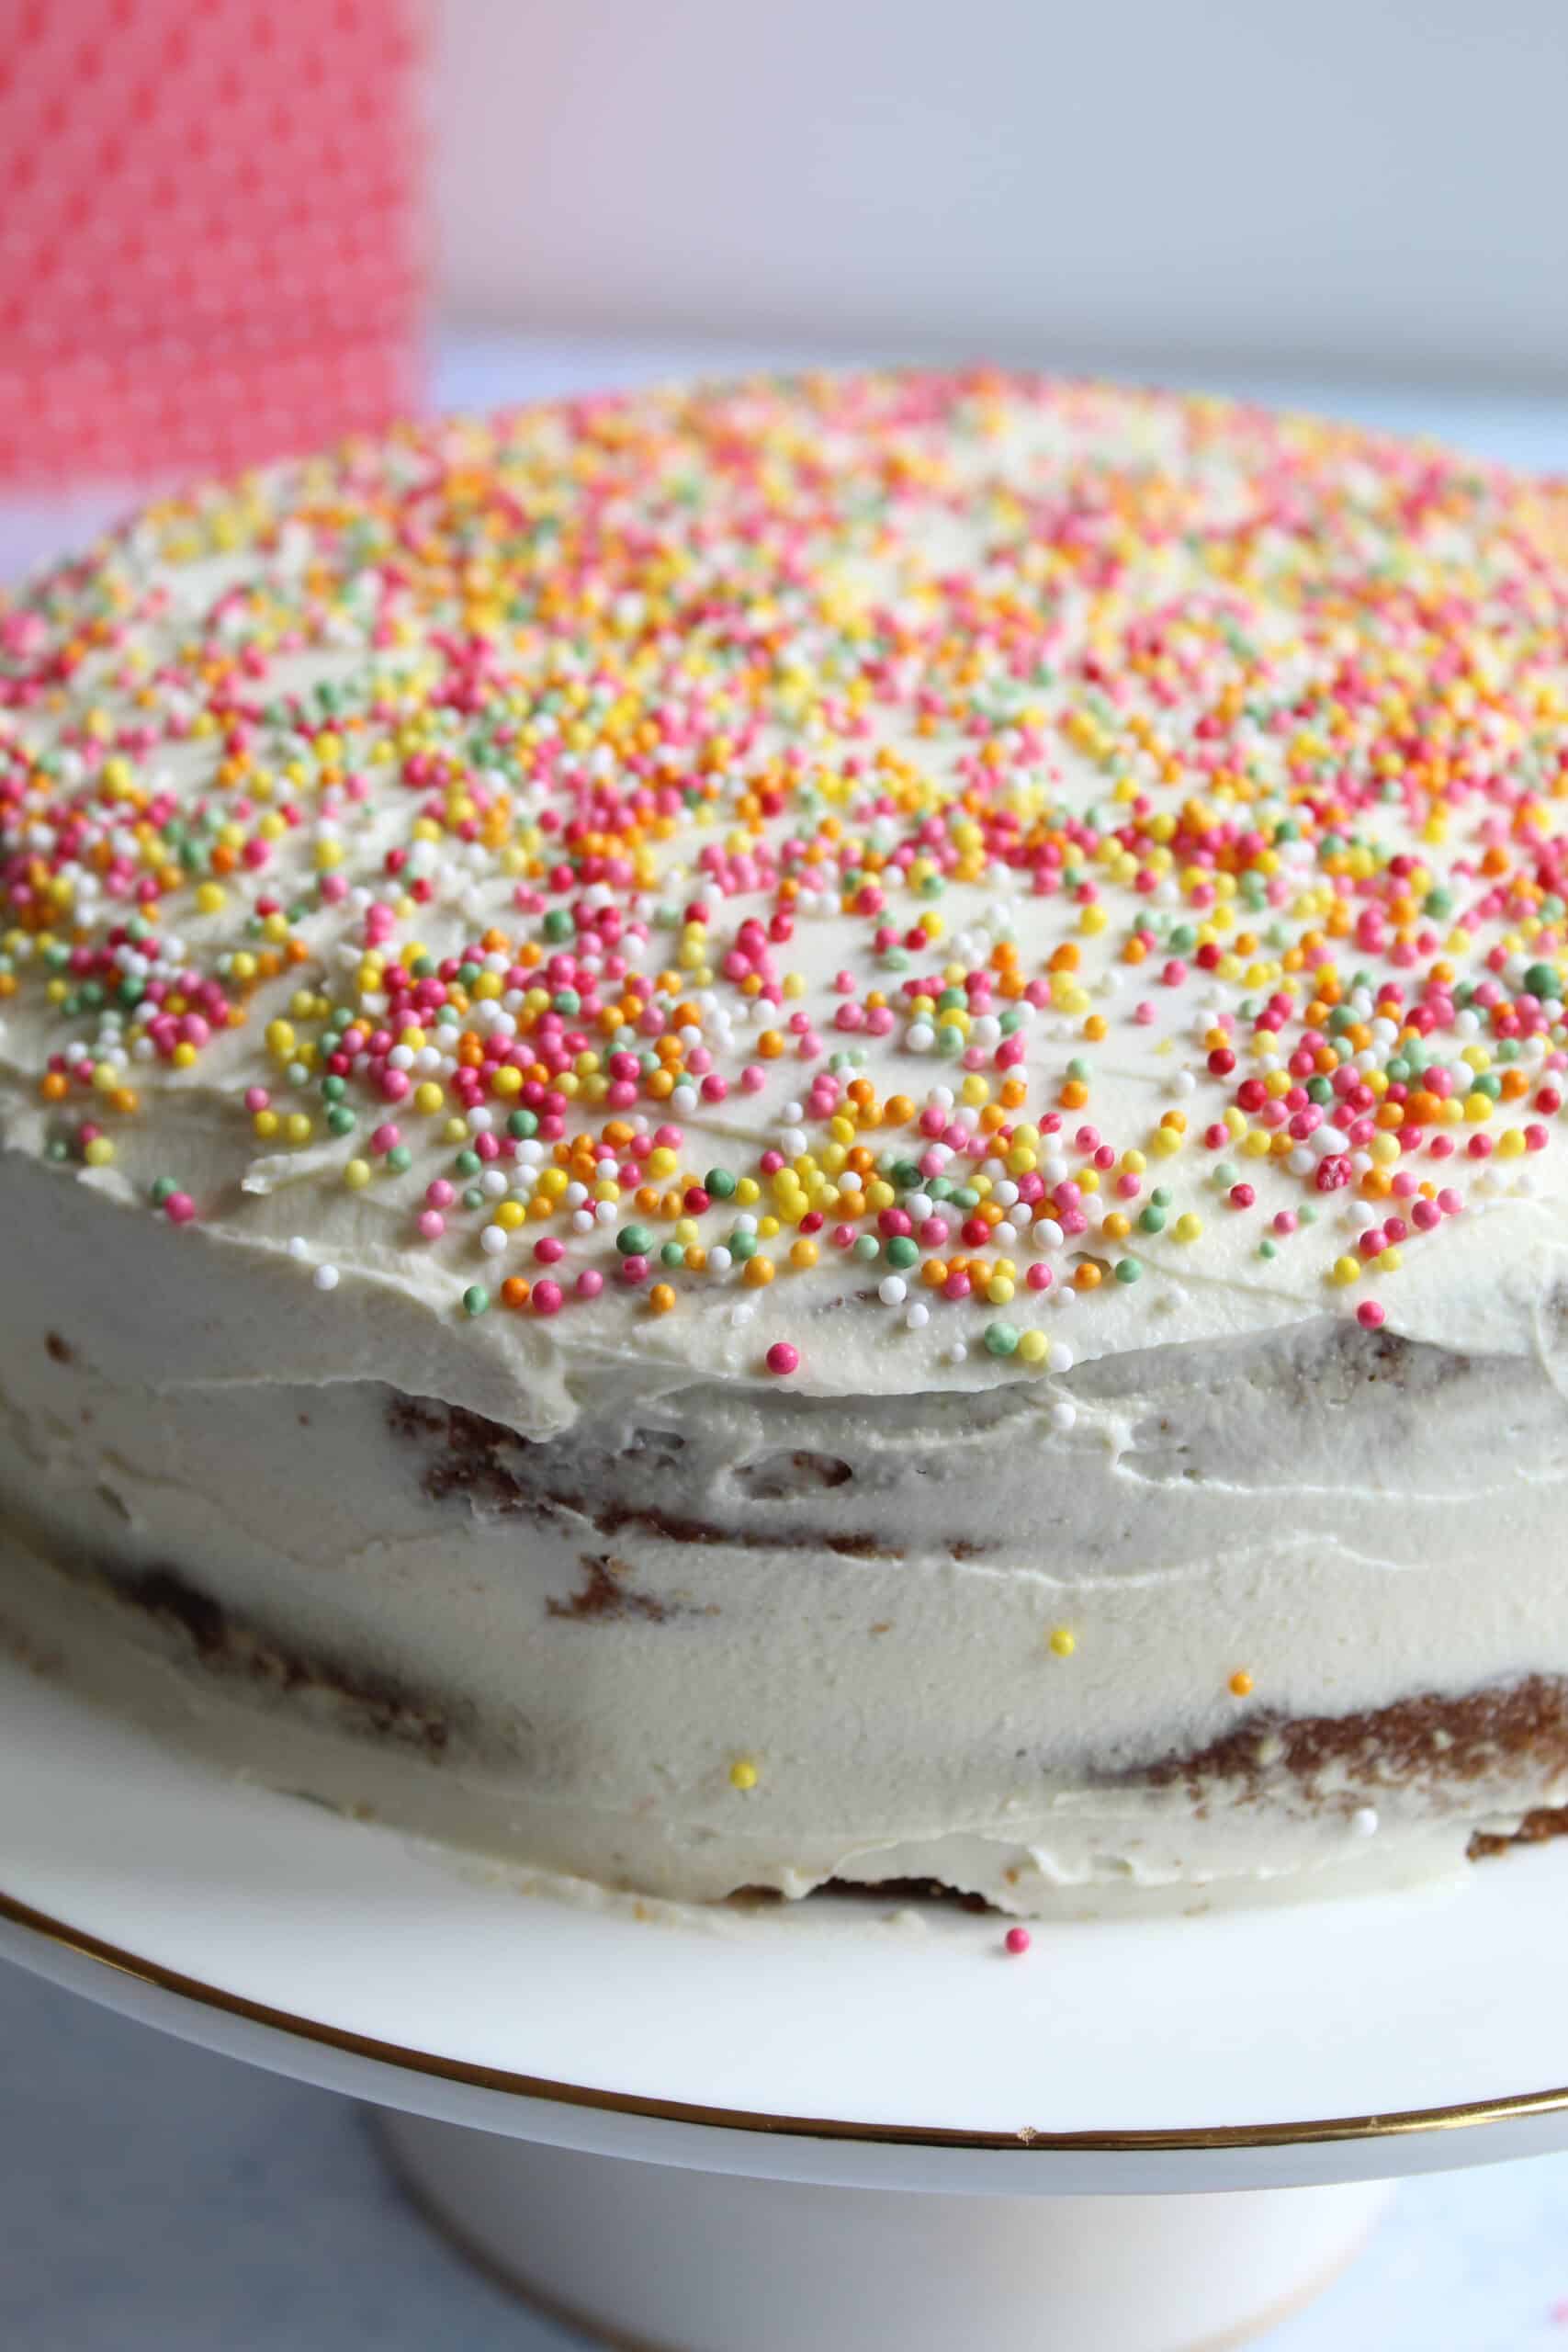 sponge cake decorated with colorful sprinkles